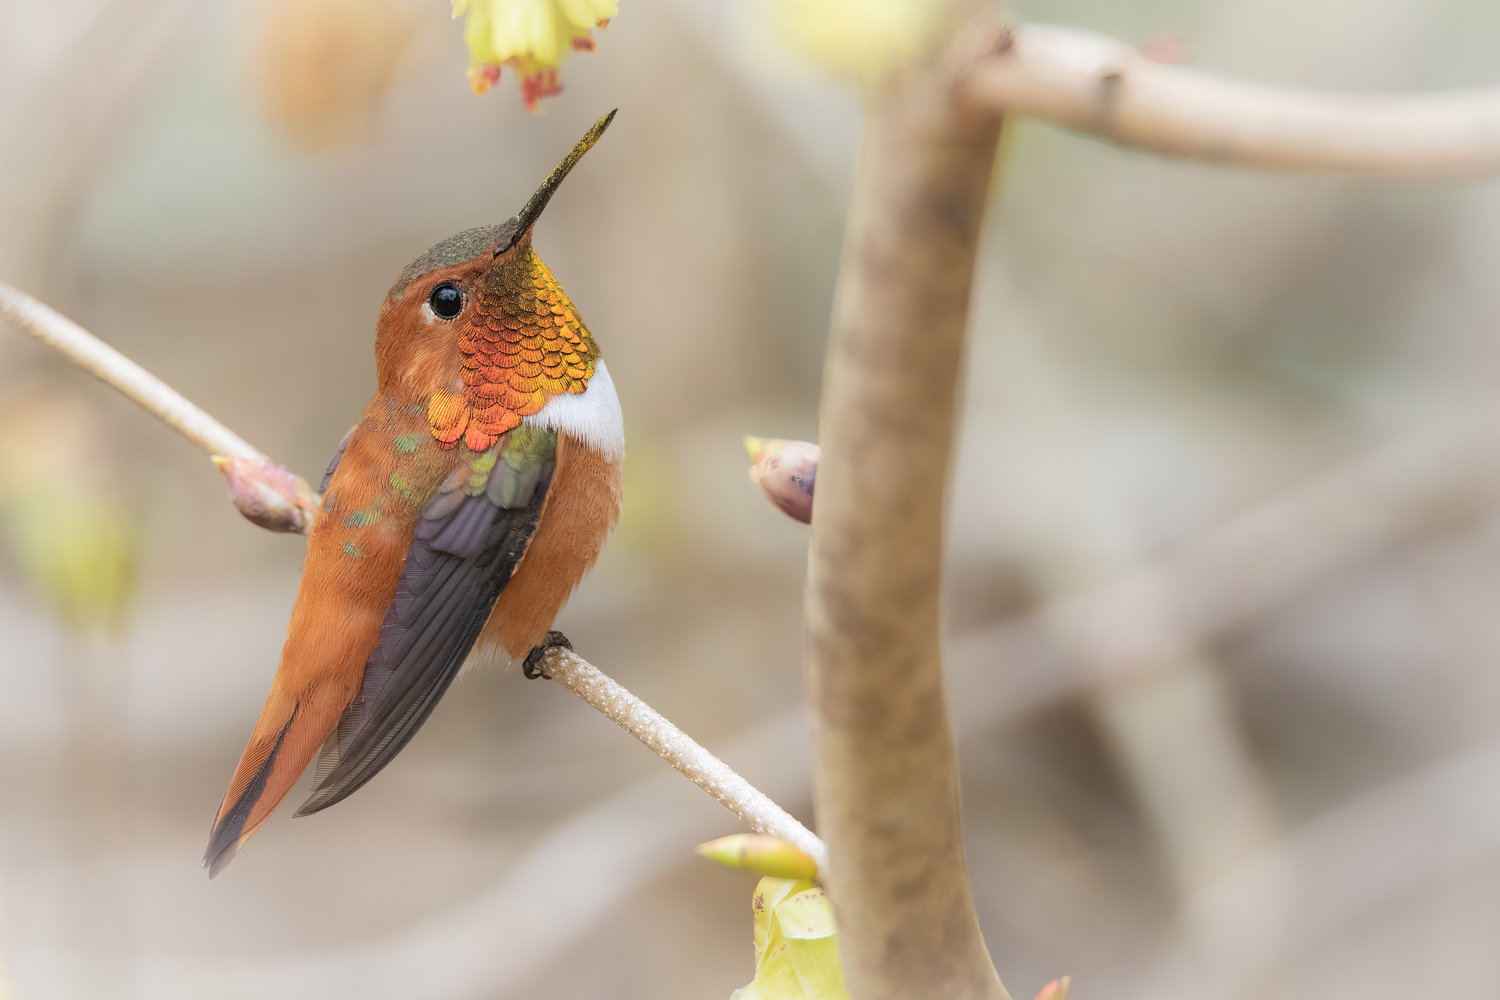 This is a male Rufous Hummingbird, which migrates here each year.